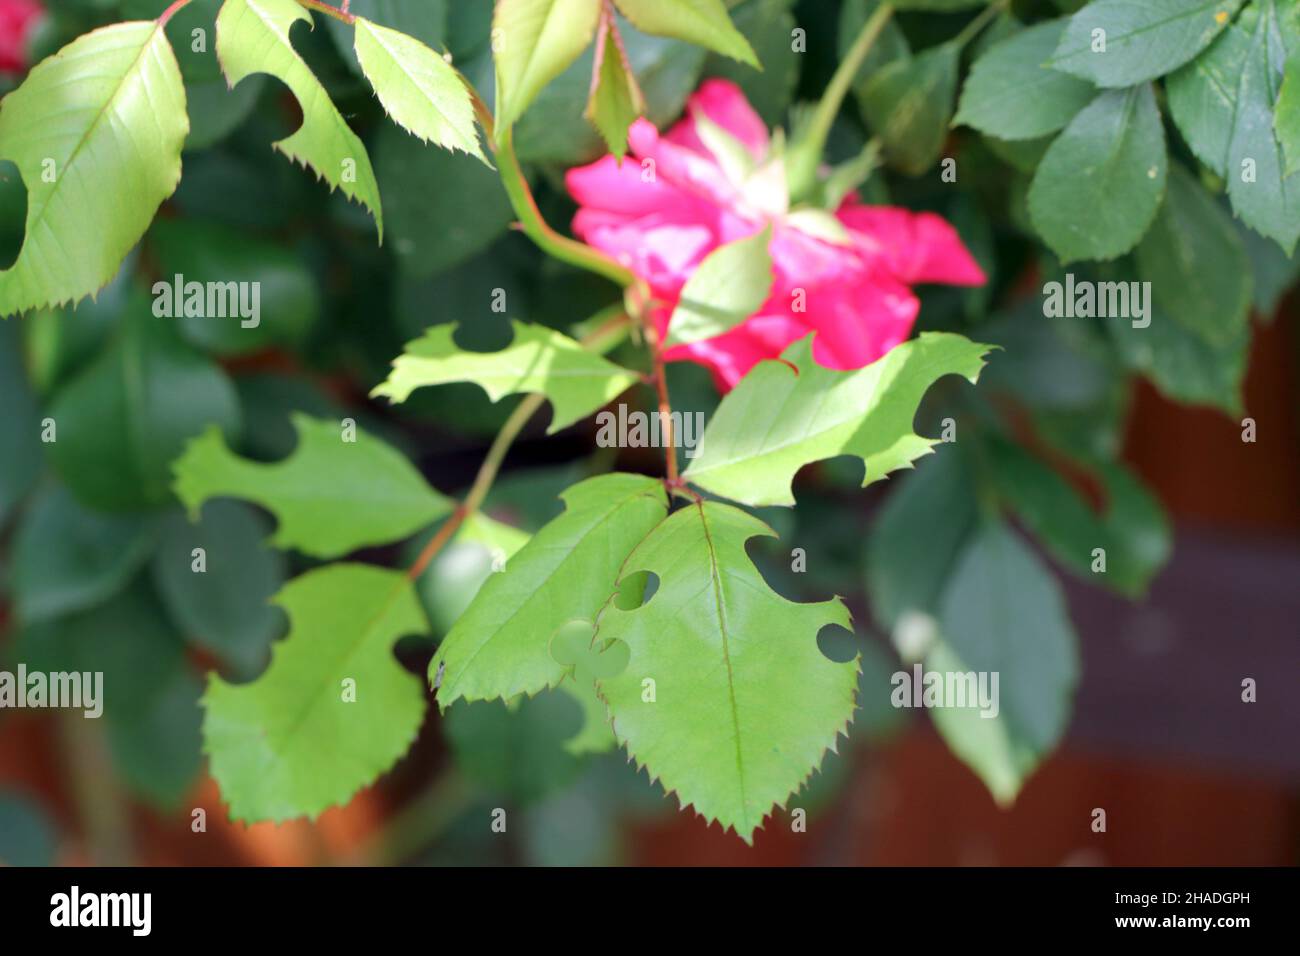 Rose leaves damaged by plant pests. Stock Photo